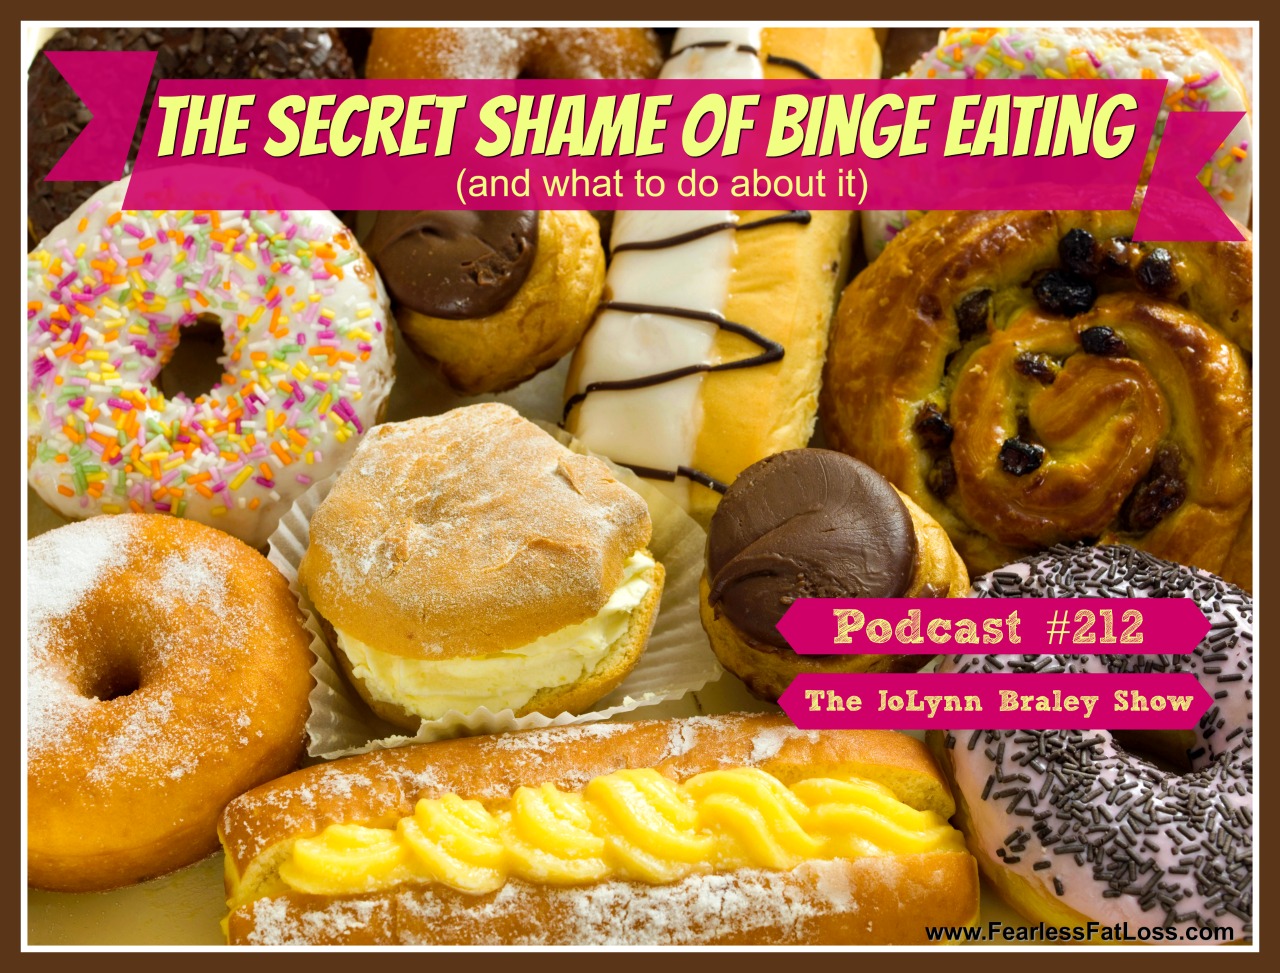 The Secret Shame Of Binge Eating (and how to start breaking free of binge eating!) | FearlessFatLoss.com | Permanent Weight Loss coach JoLynn Braley